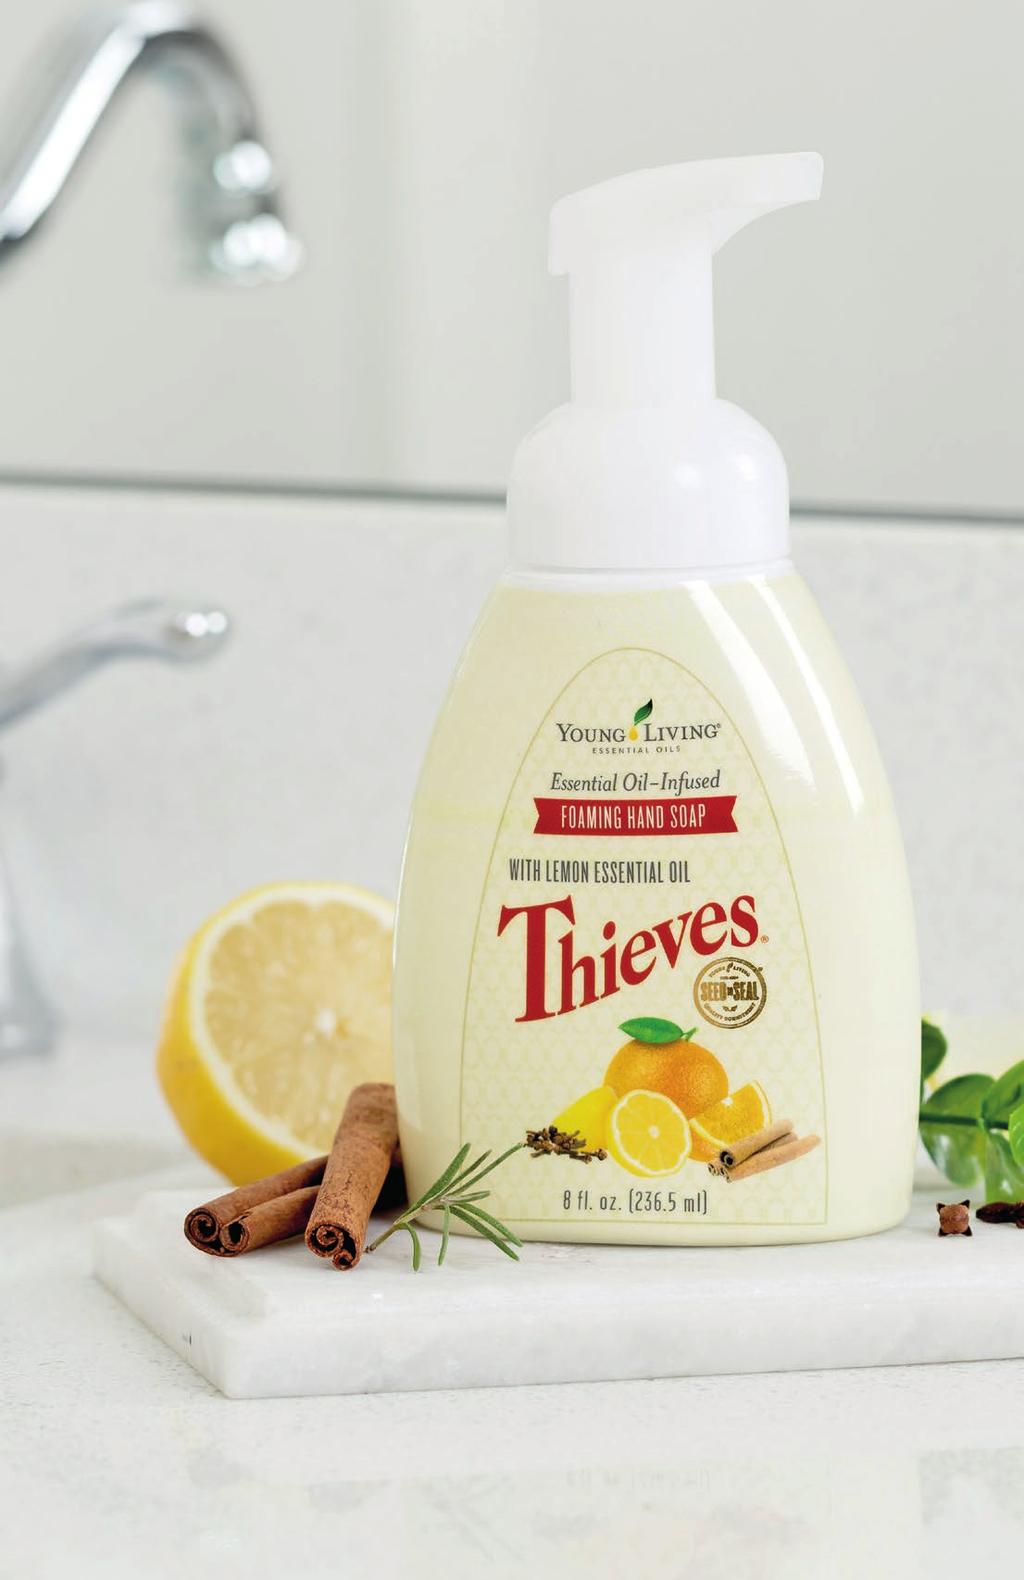 Thieves Foaming Hand Soap can also be used as an effective spot remover on fabrics! THIEVES FOAMING HAND SOAP Single Item No. 367402 3 pk. Item No. 364302 Refill Item No.